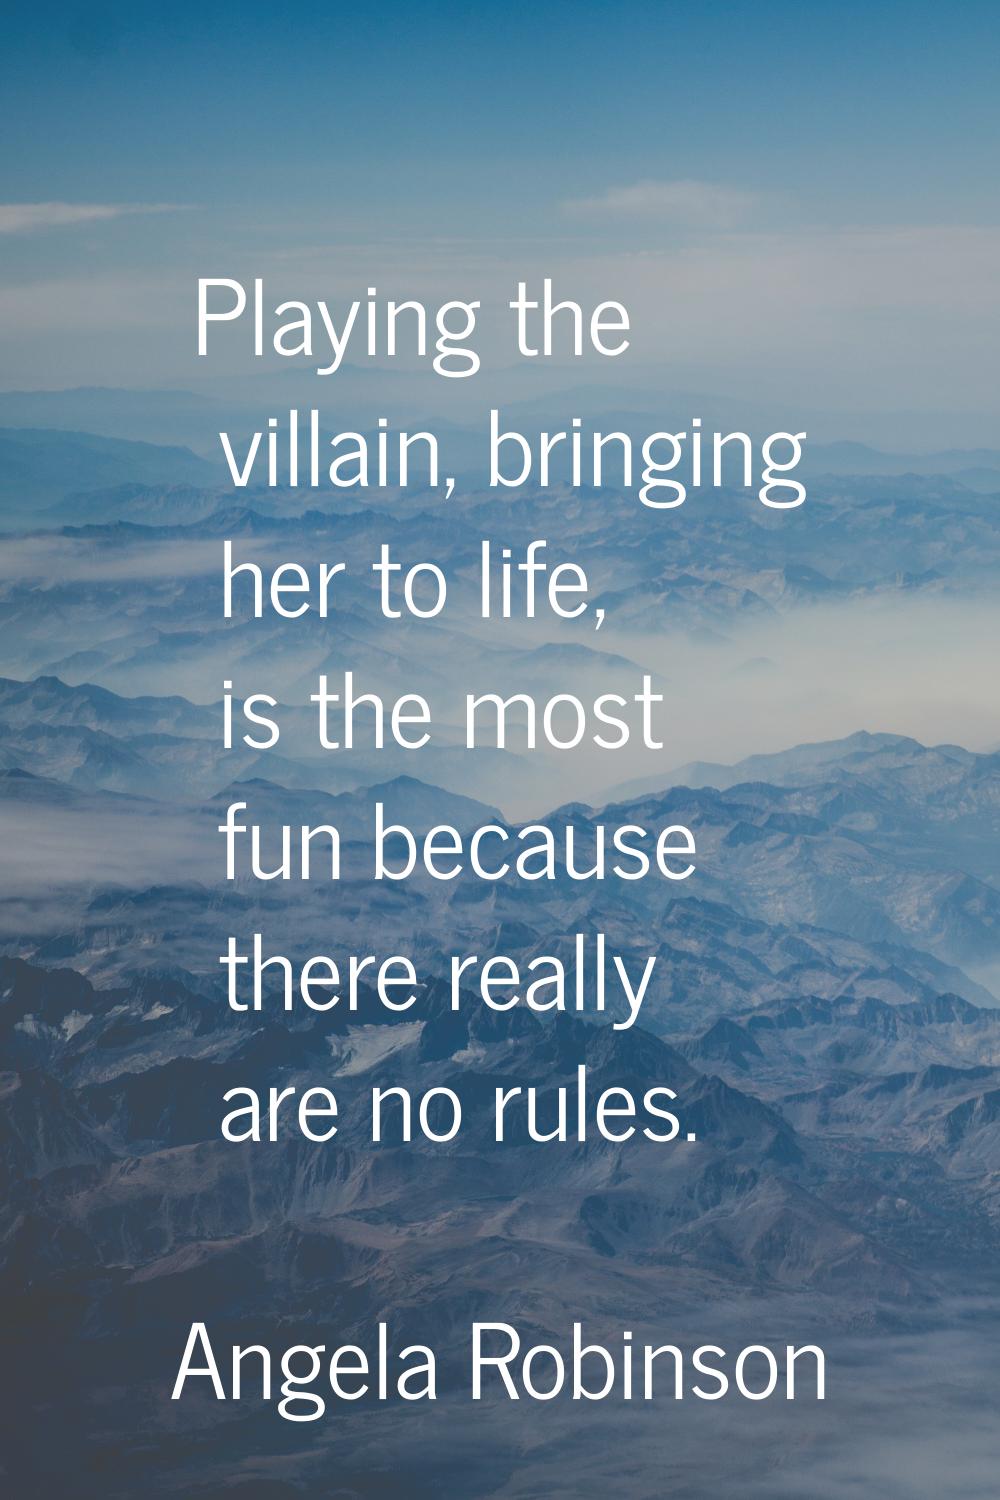 Playing the villain, bringing her to life, is the most fun because there really are no rules.